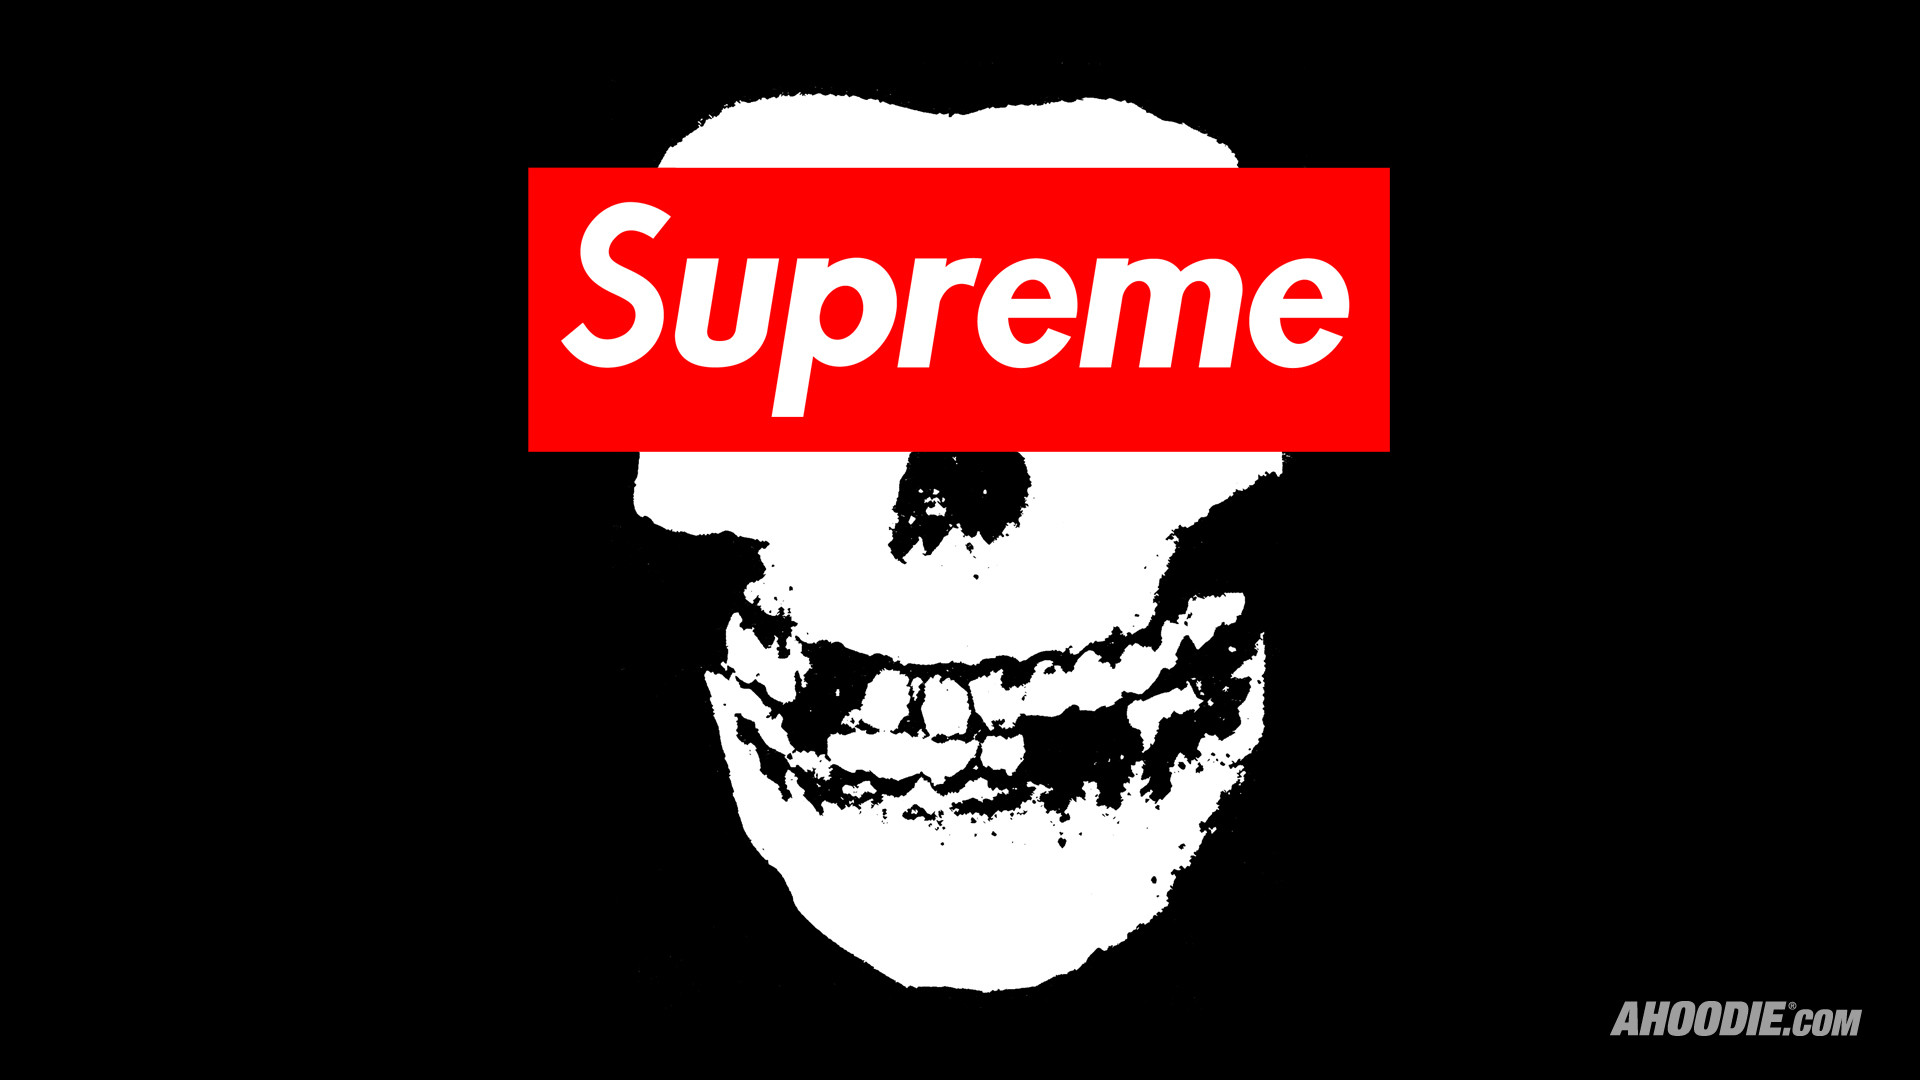 1920x1080 Supreme Weed Wallpaper Iphone 5 | Top Pictures Gallery Online